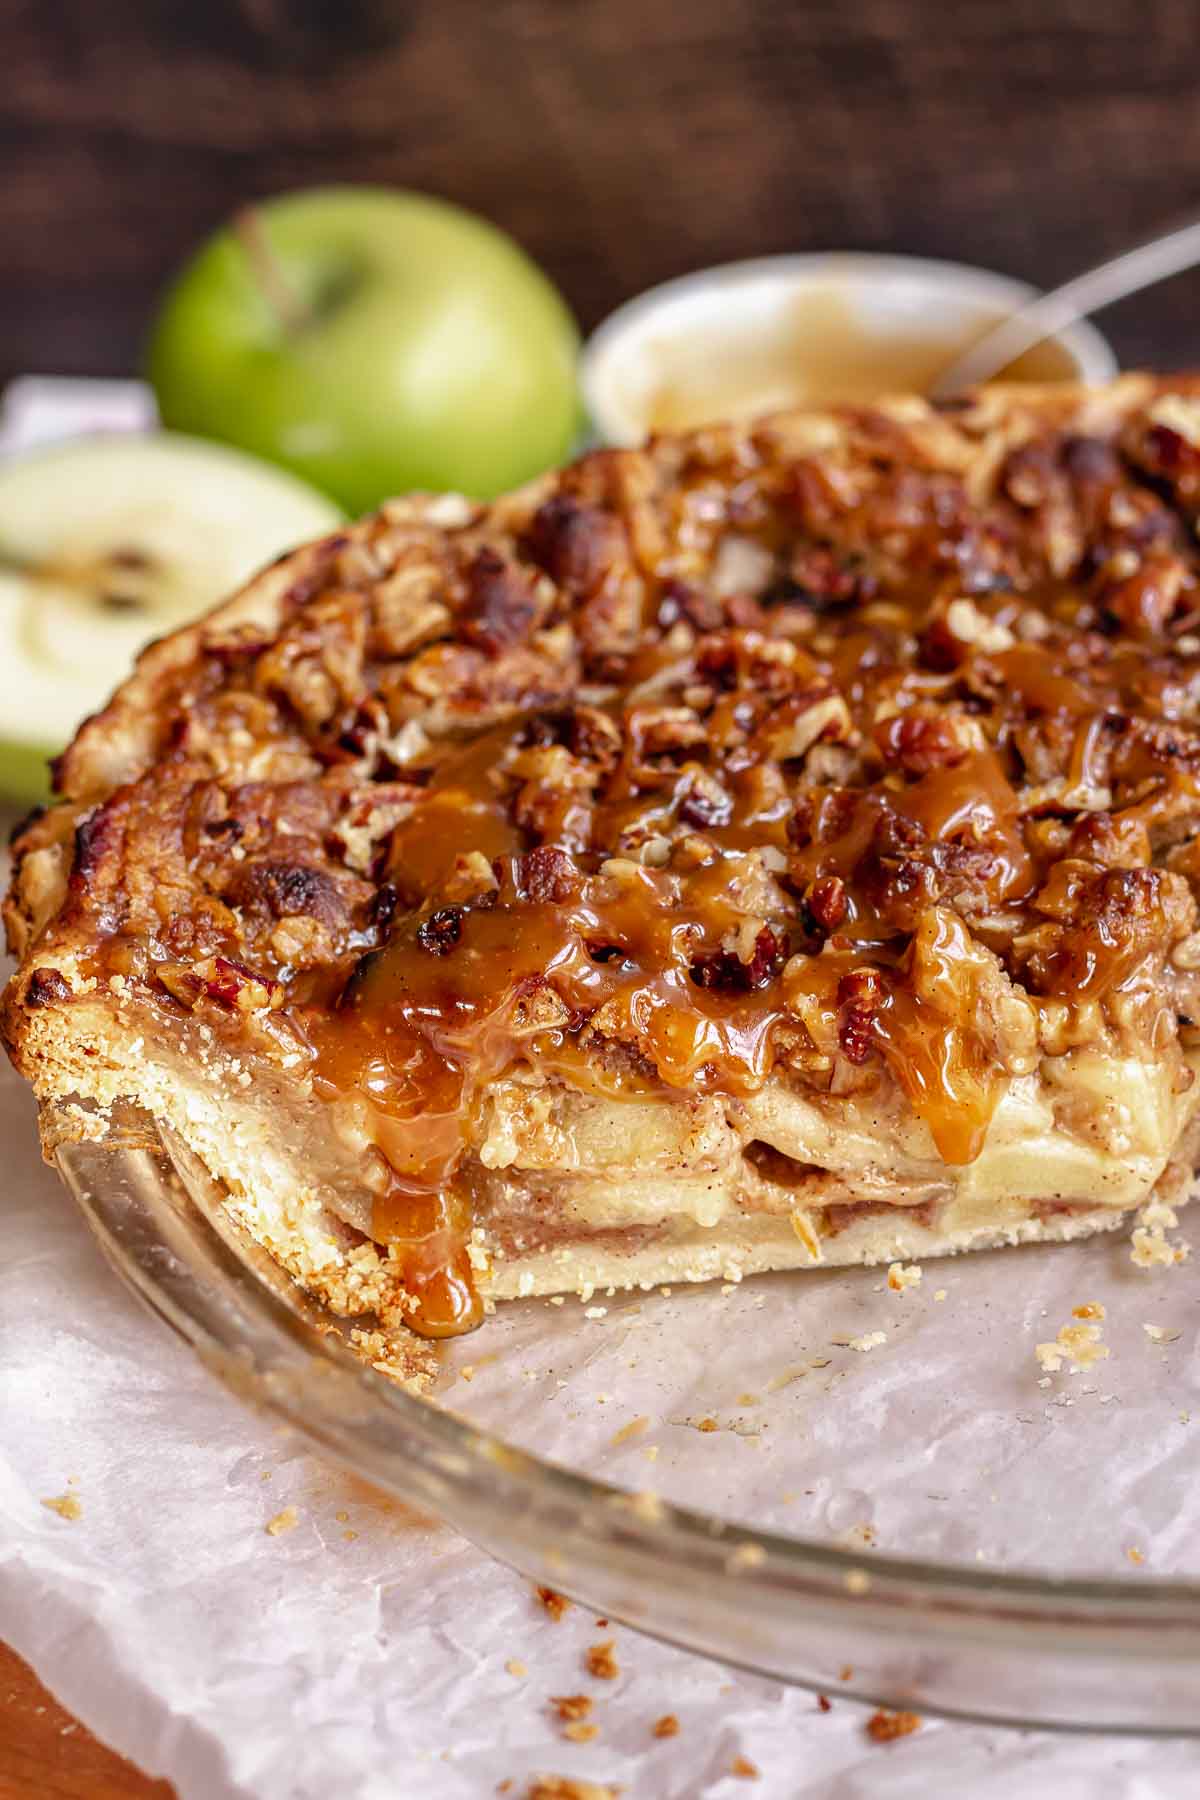 Caramel apple pie in a a pie dish with caramel drizzling over a cut slice.